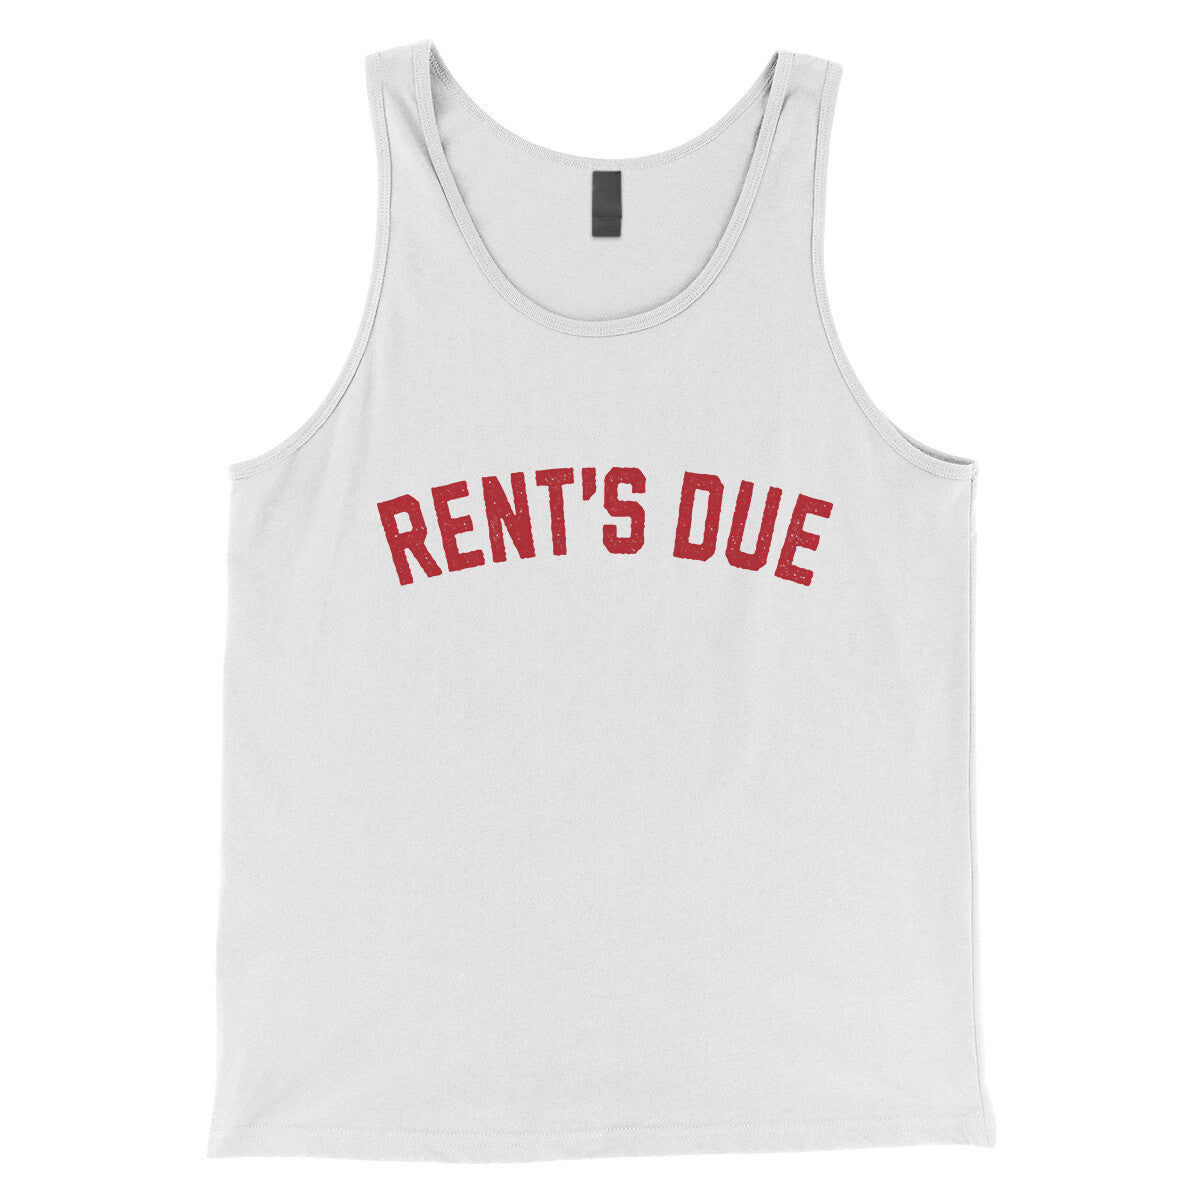 Rent's Due in White Color